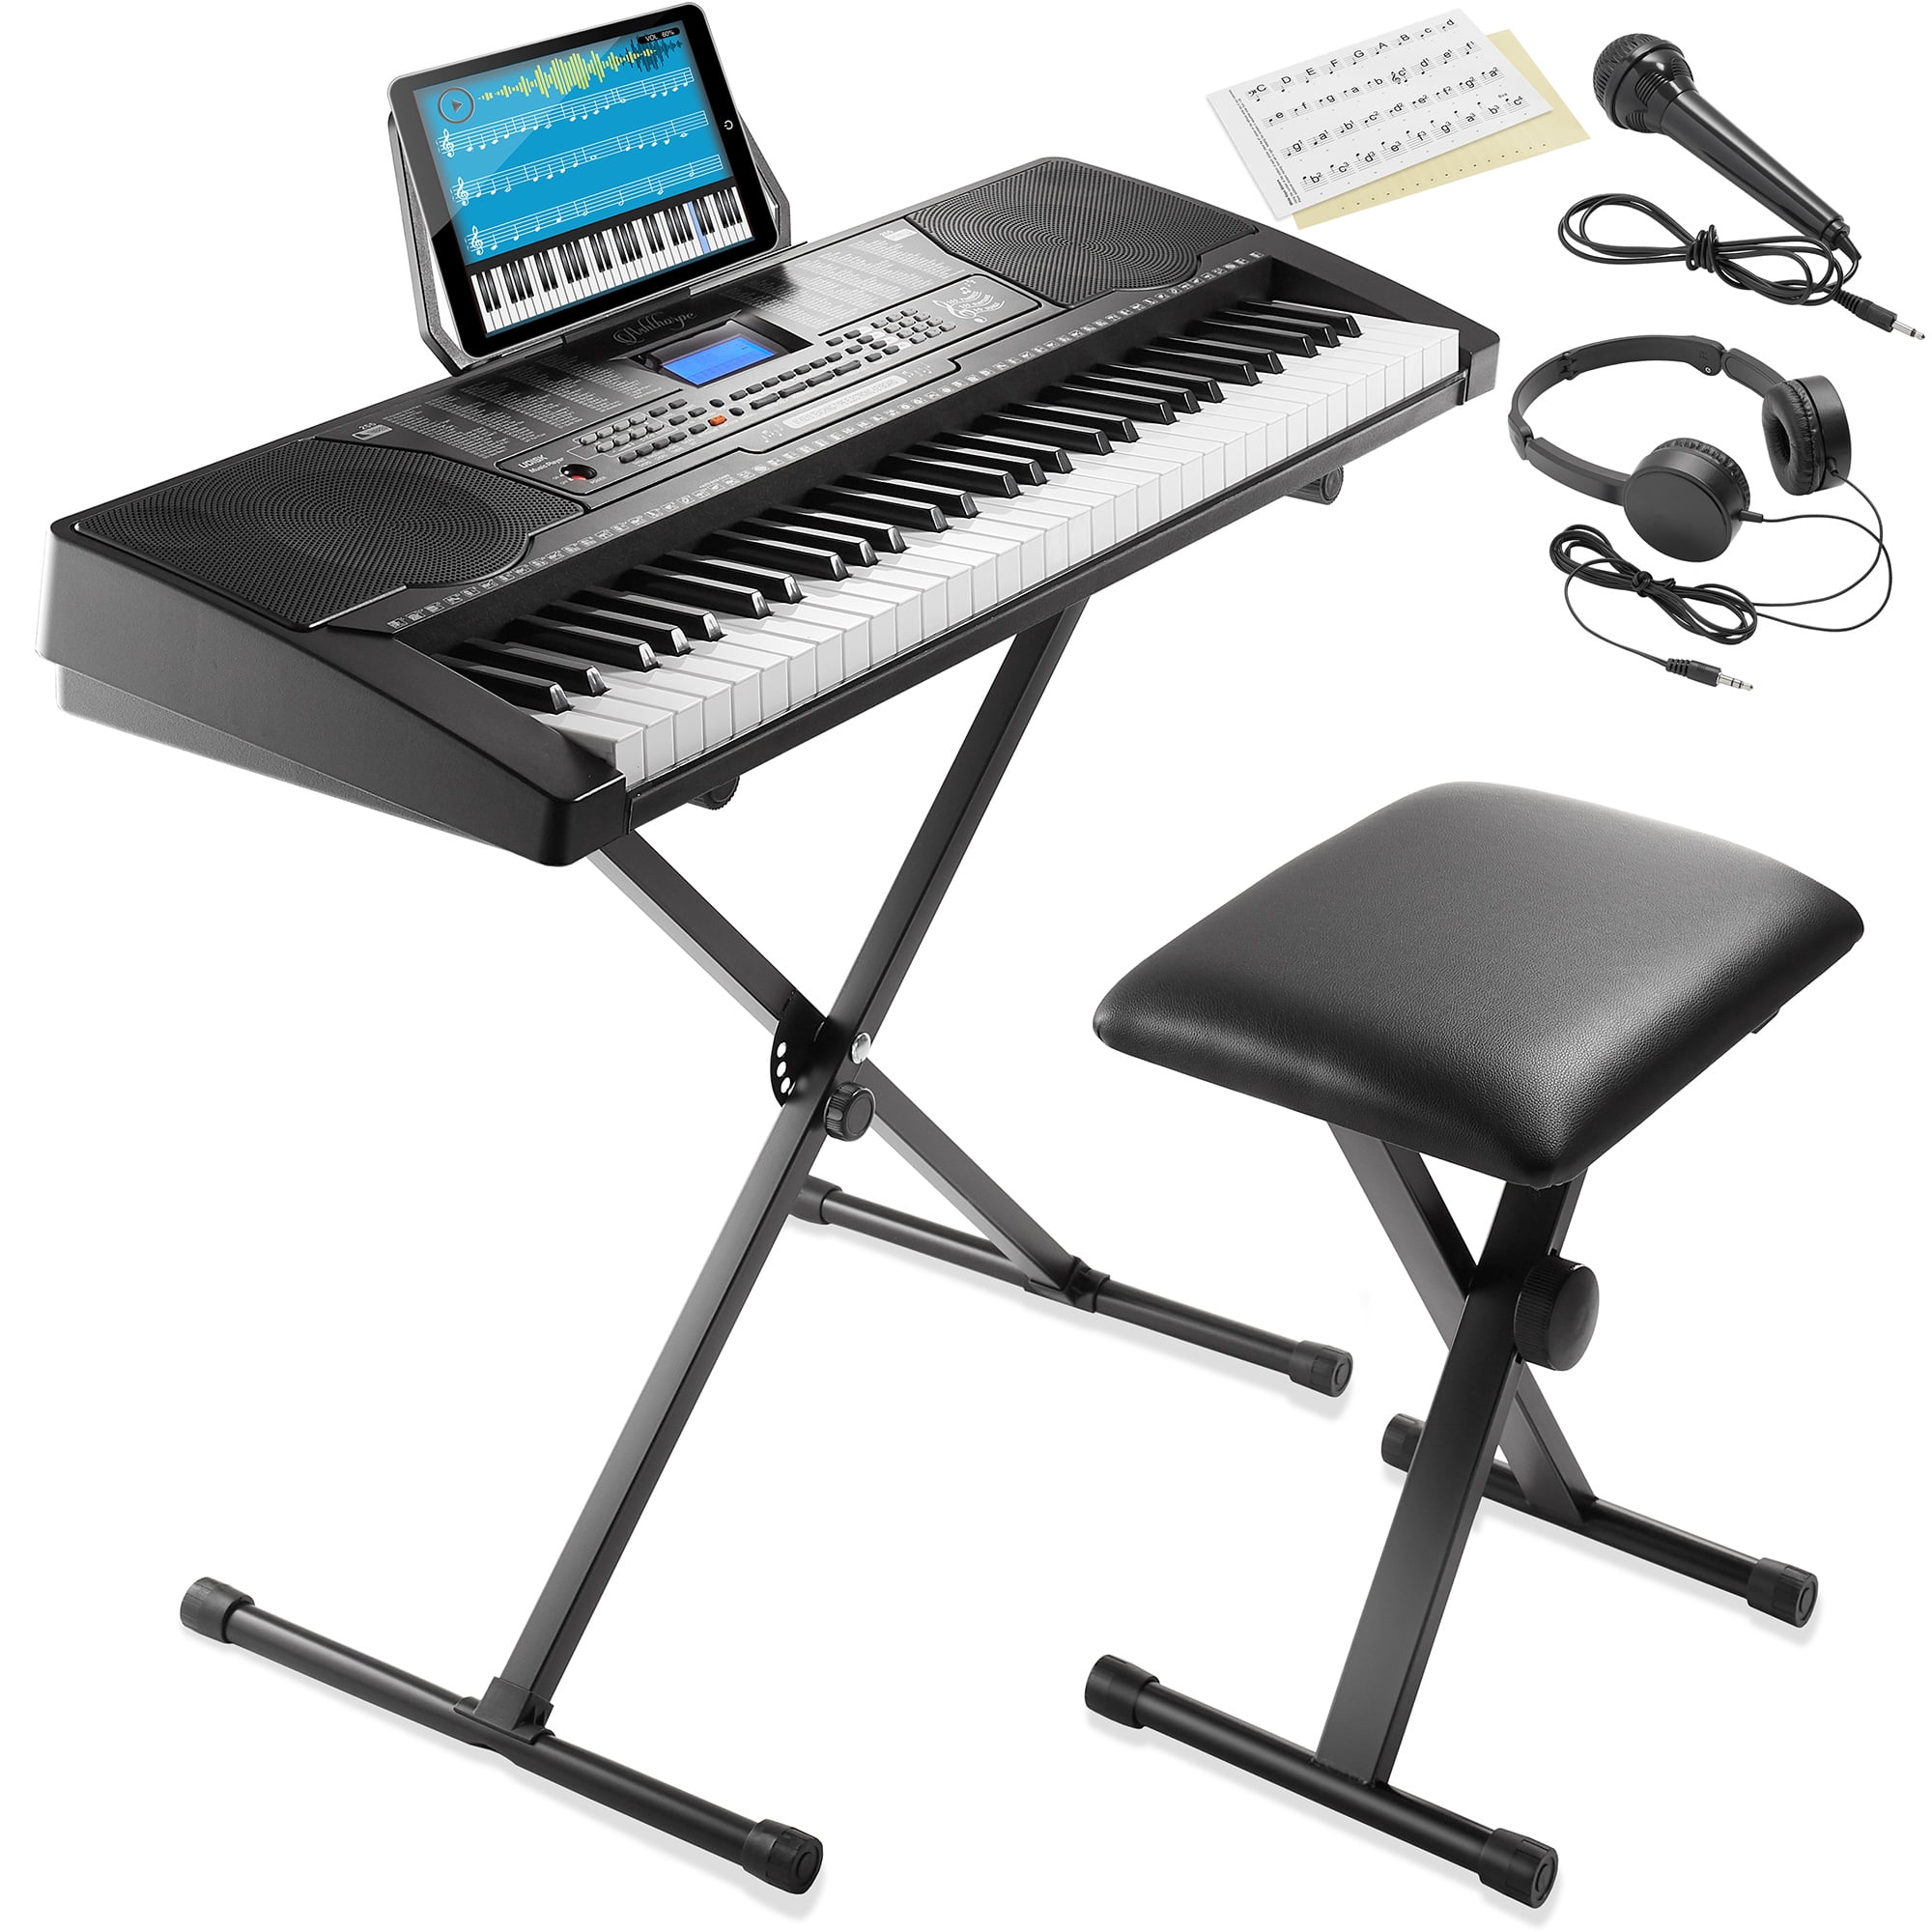 Bench Portable Piano Keyboard for Beginners Light Up Music Keyboard Built-in Dual Speakers with H Stand Music Stand Microphone 61 Key Electric Keyboard Piano H Stand LED Display 